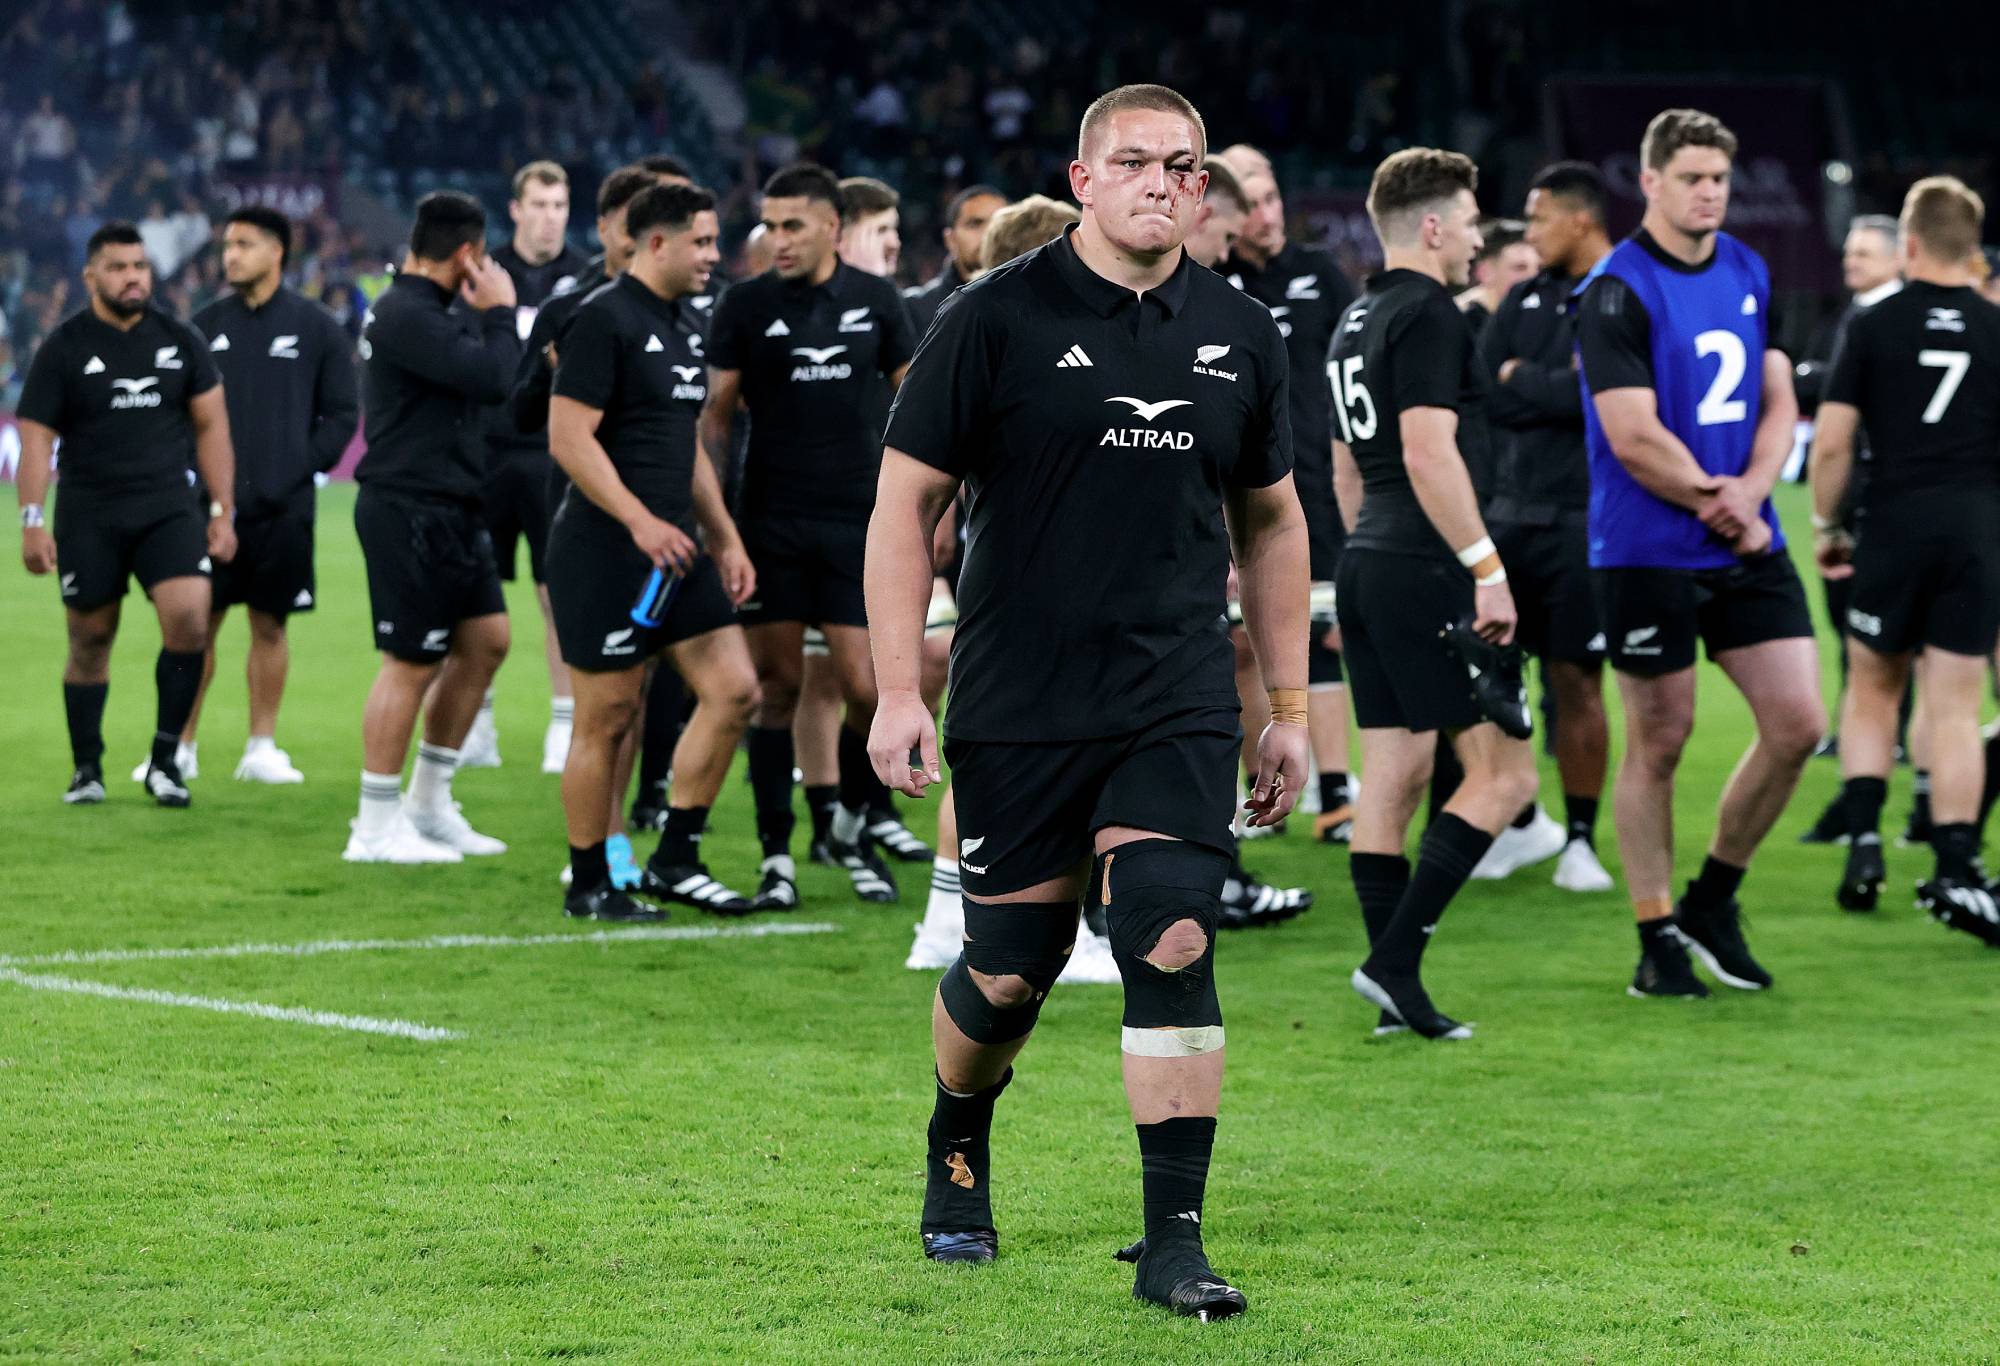 LONDON, ENGLAND - AUGUST 25: Ethan de Groot of New Zealand looks dejected following the team's defeat in the the Summer International match between New Zealand All Blacks v South Africa at Twickenham Stadium on August 25, 2023 in London, England. (Photo by David Rogers/Getty Images)